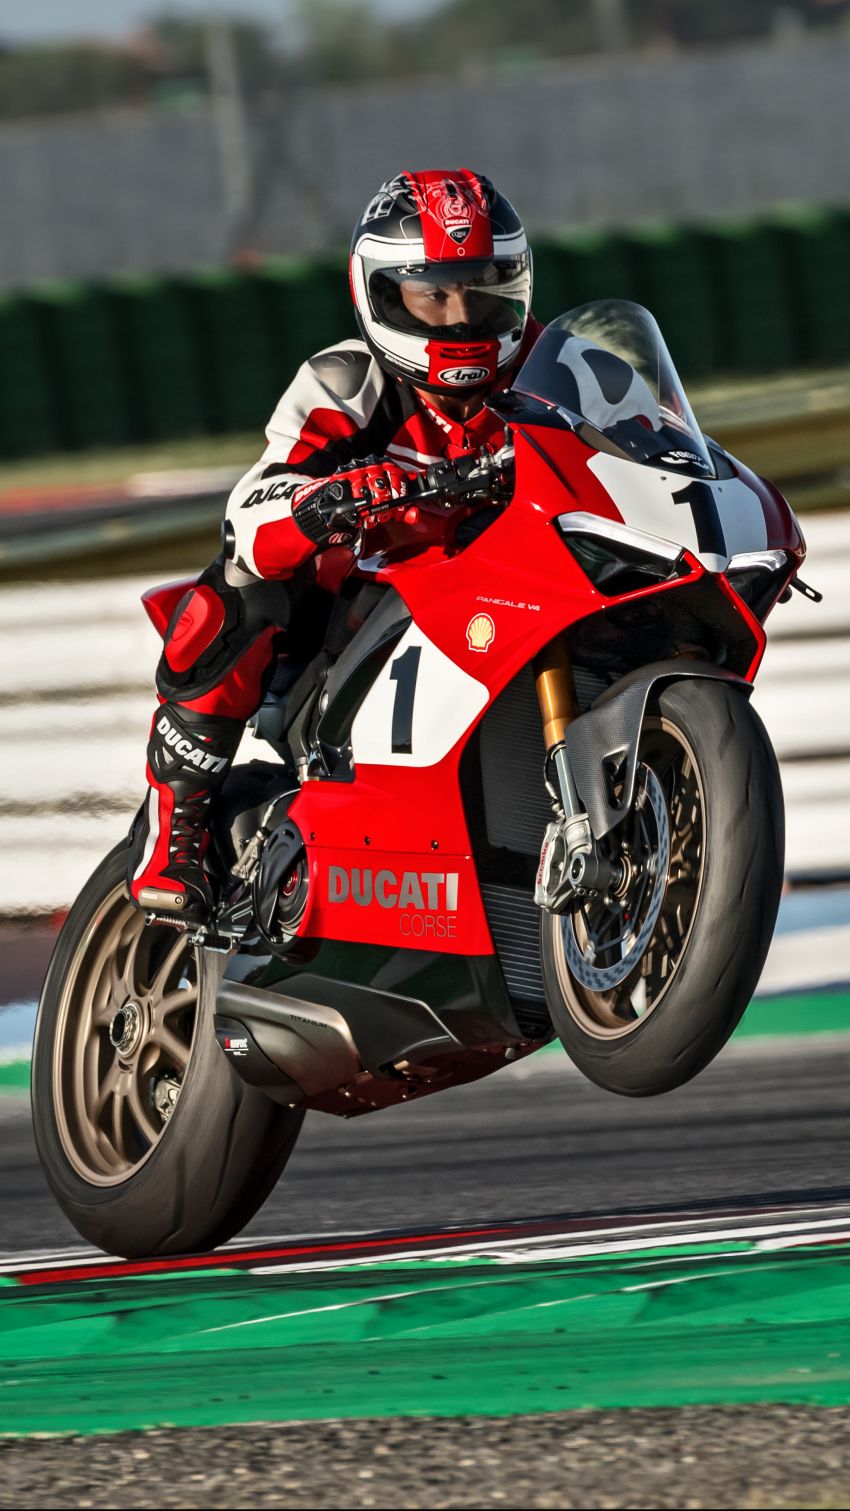 2019 Ducati Panigale V4 25th Anniversary 916 – tribute to the motorcycle that redefined the “Superbike” 985549